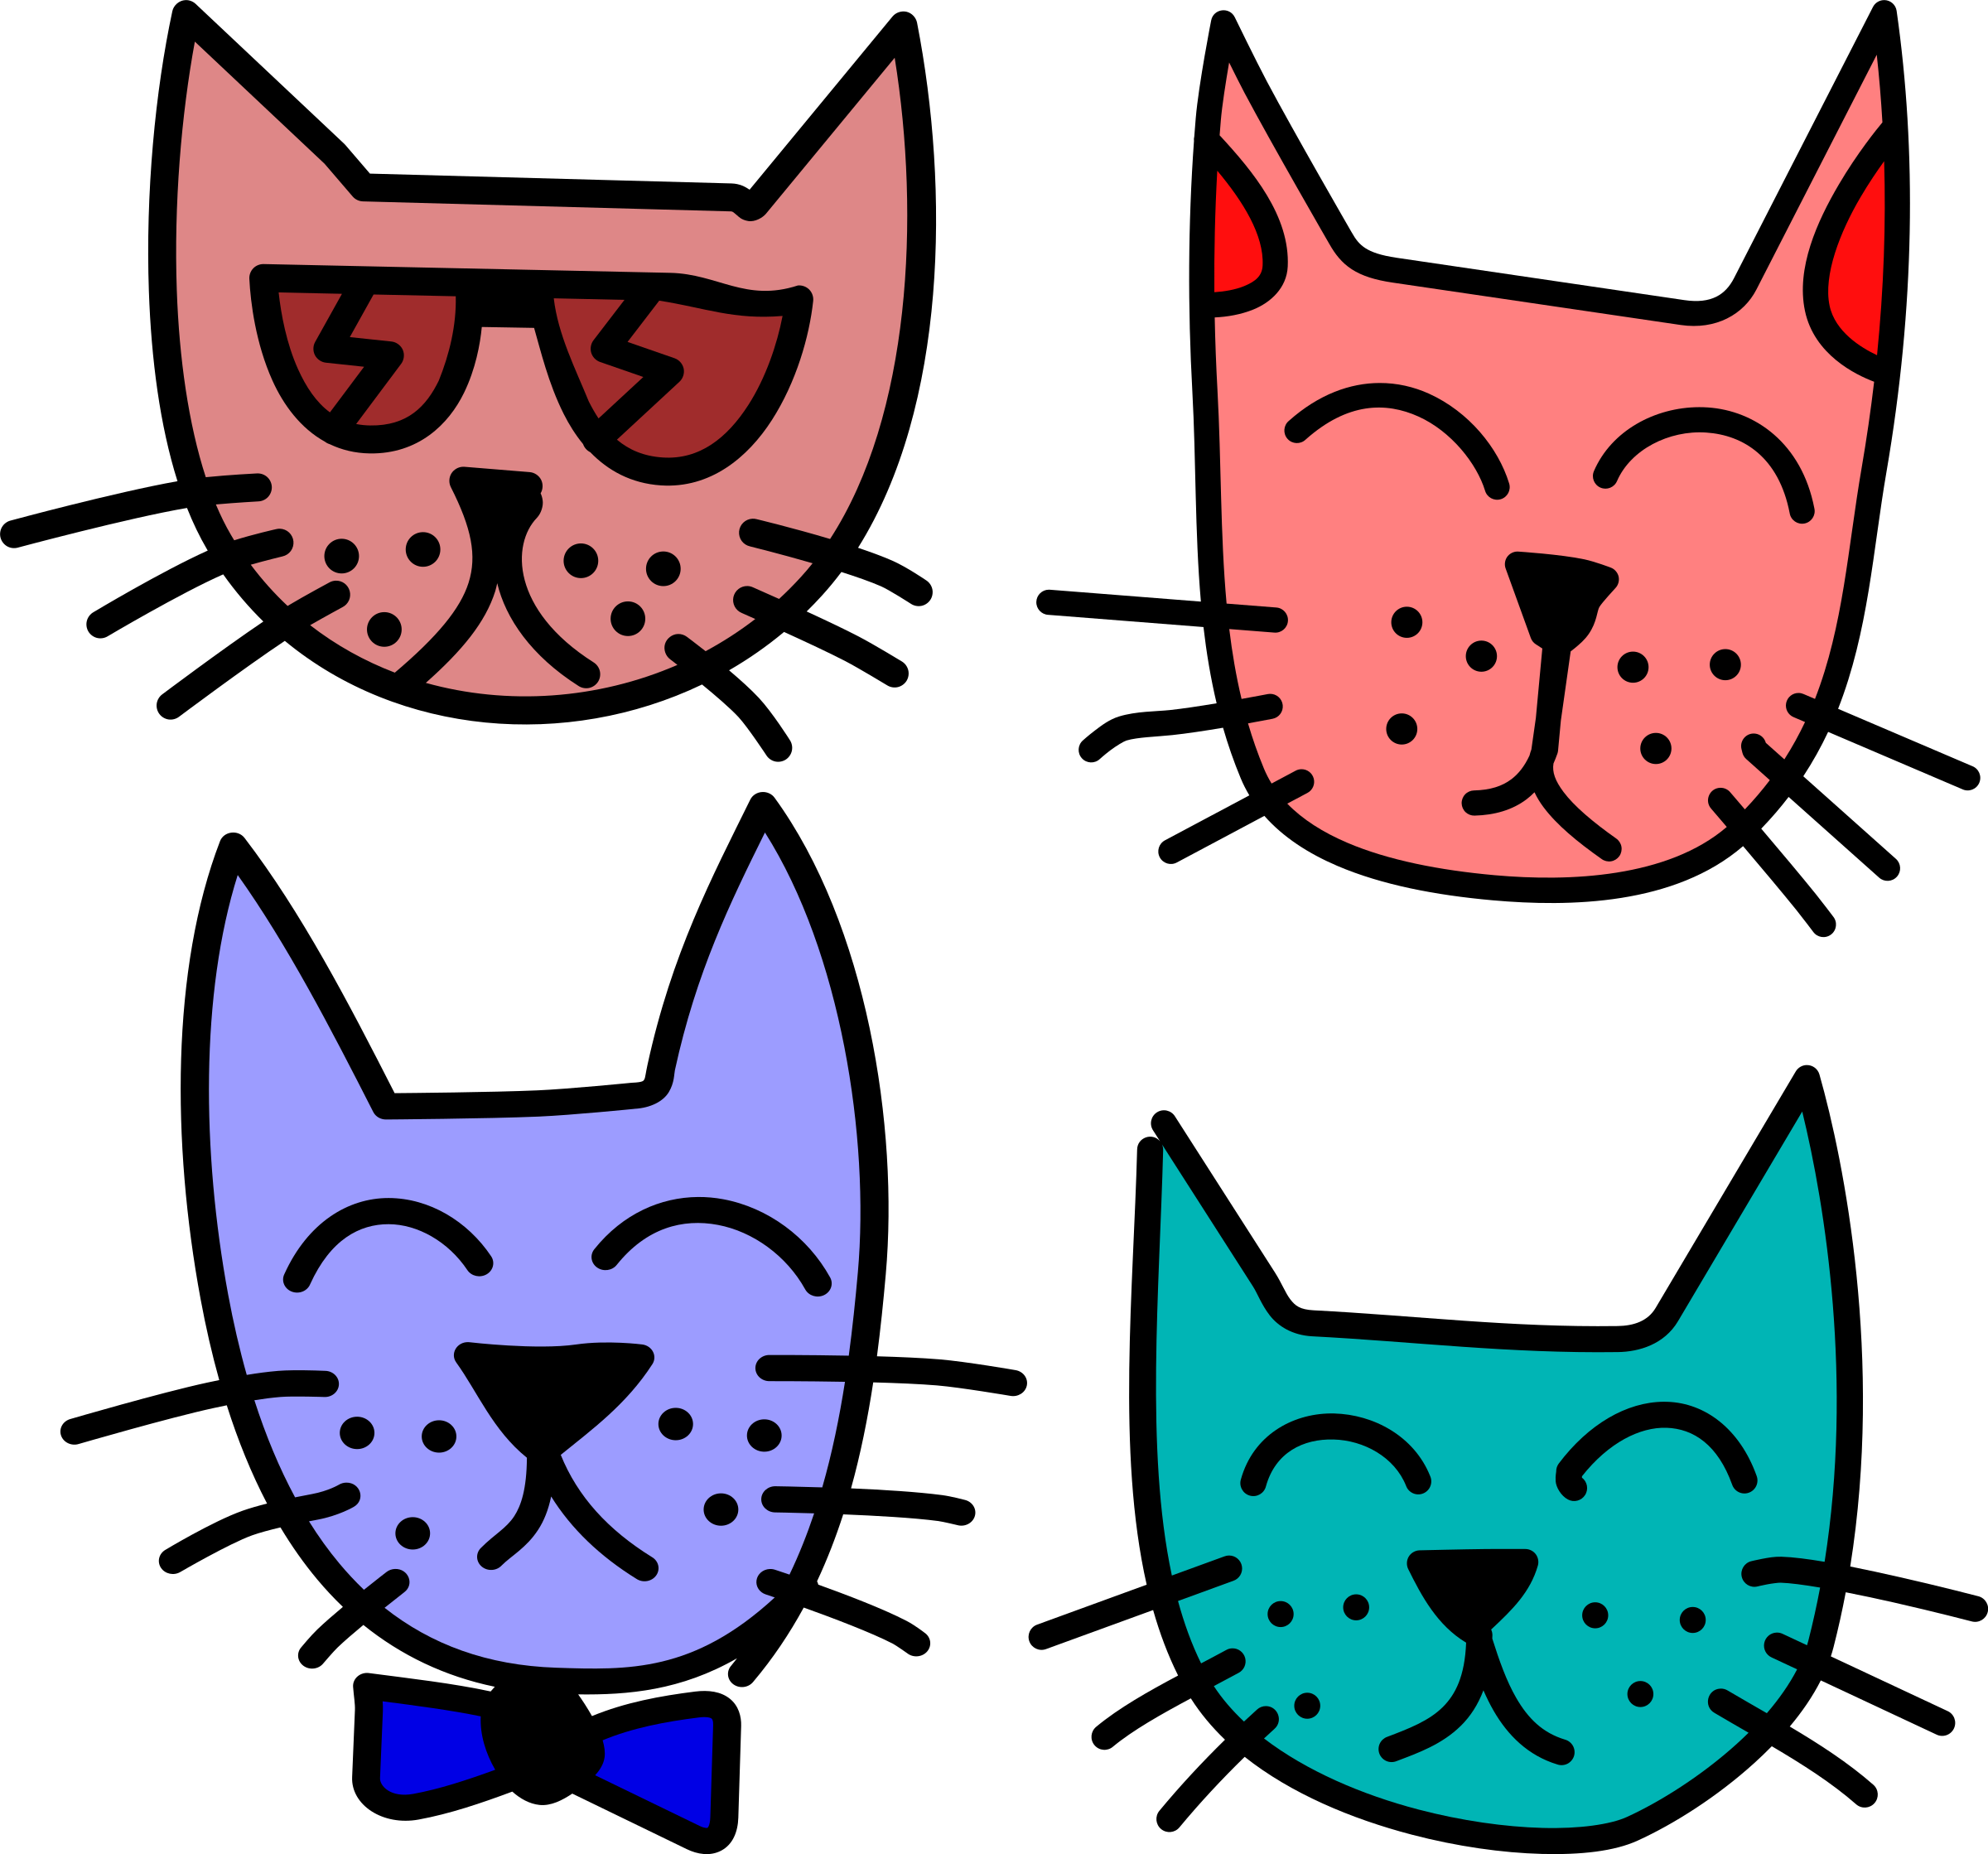 Free Graffiti Cats By Rones - Cool Cats Clip Art (2400x2238)